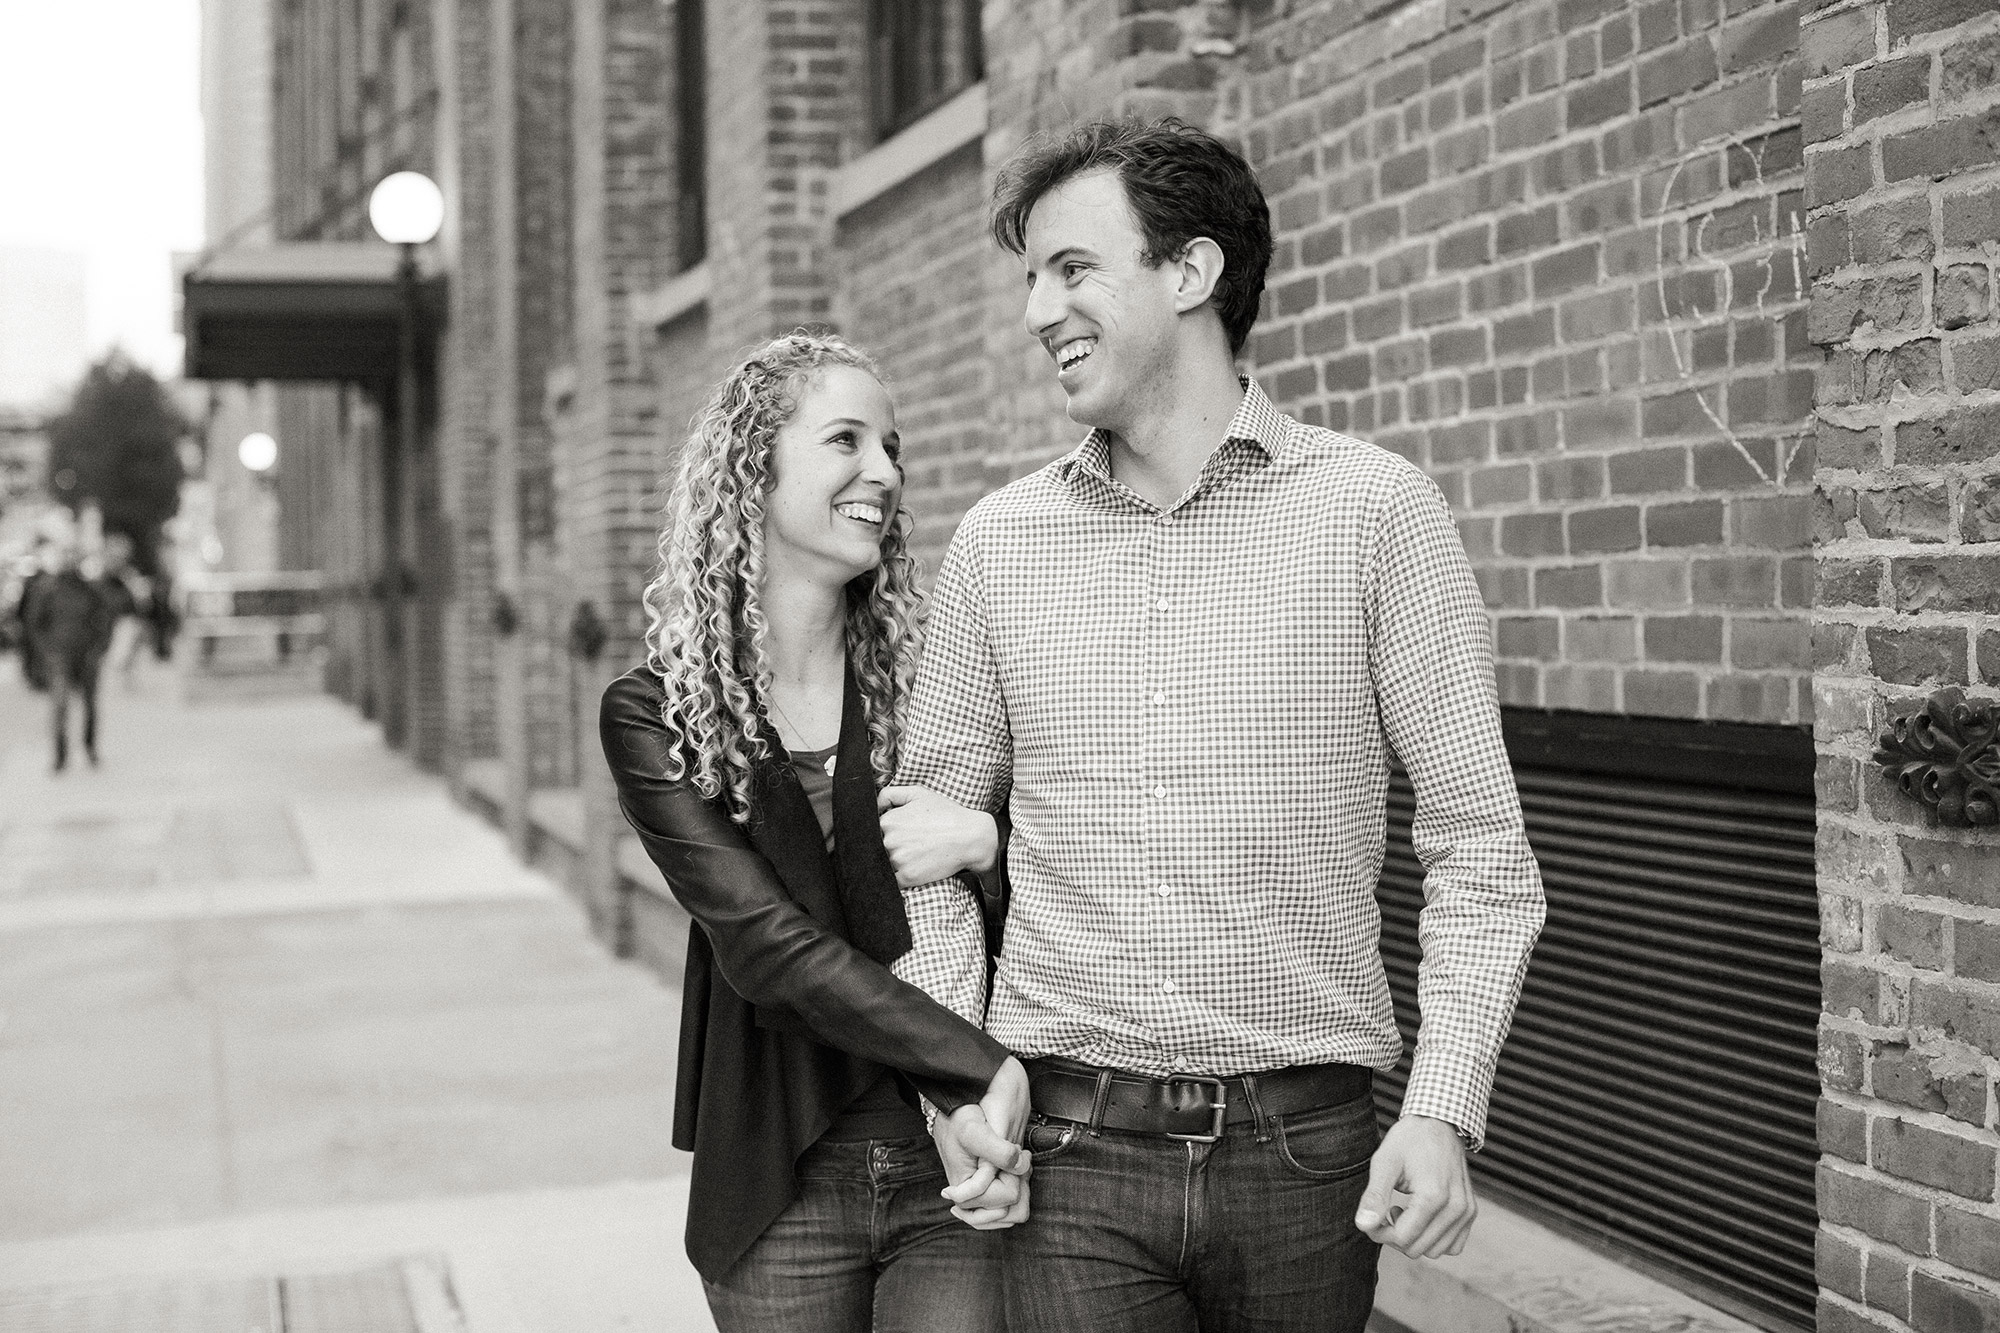 Engagement session in park slope and dumbo, Brooklyn.